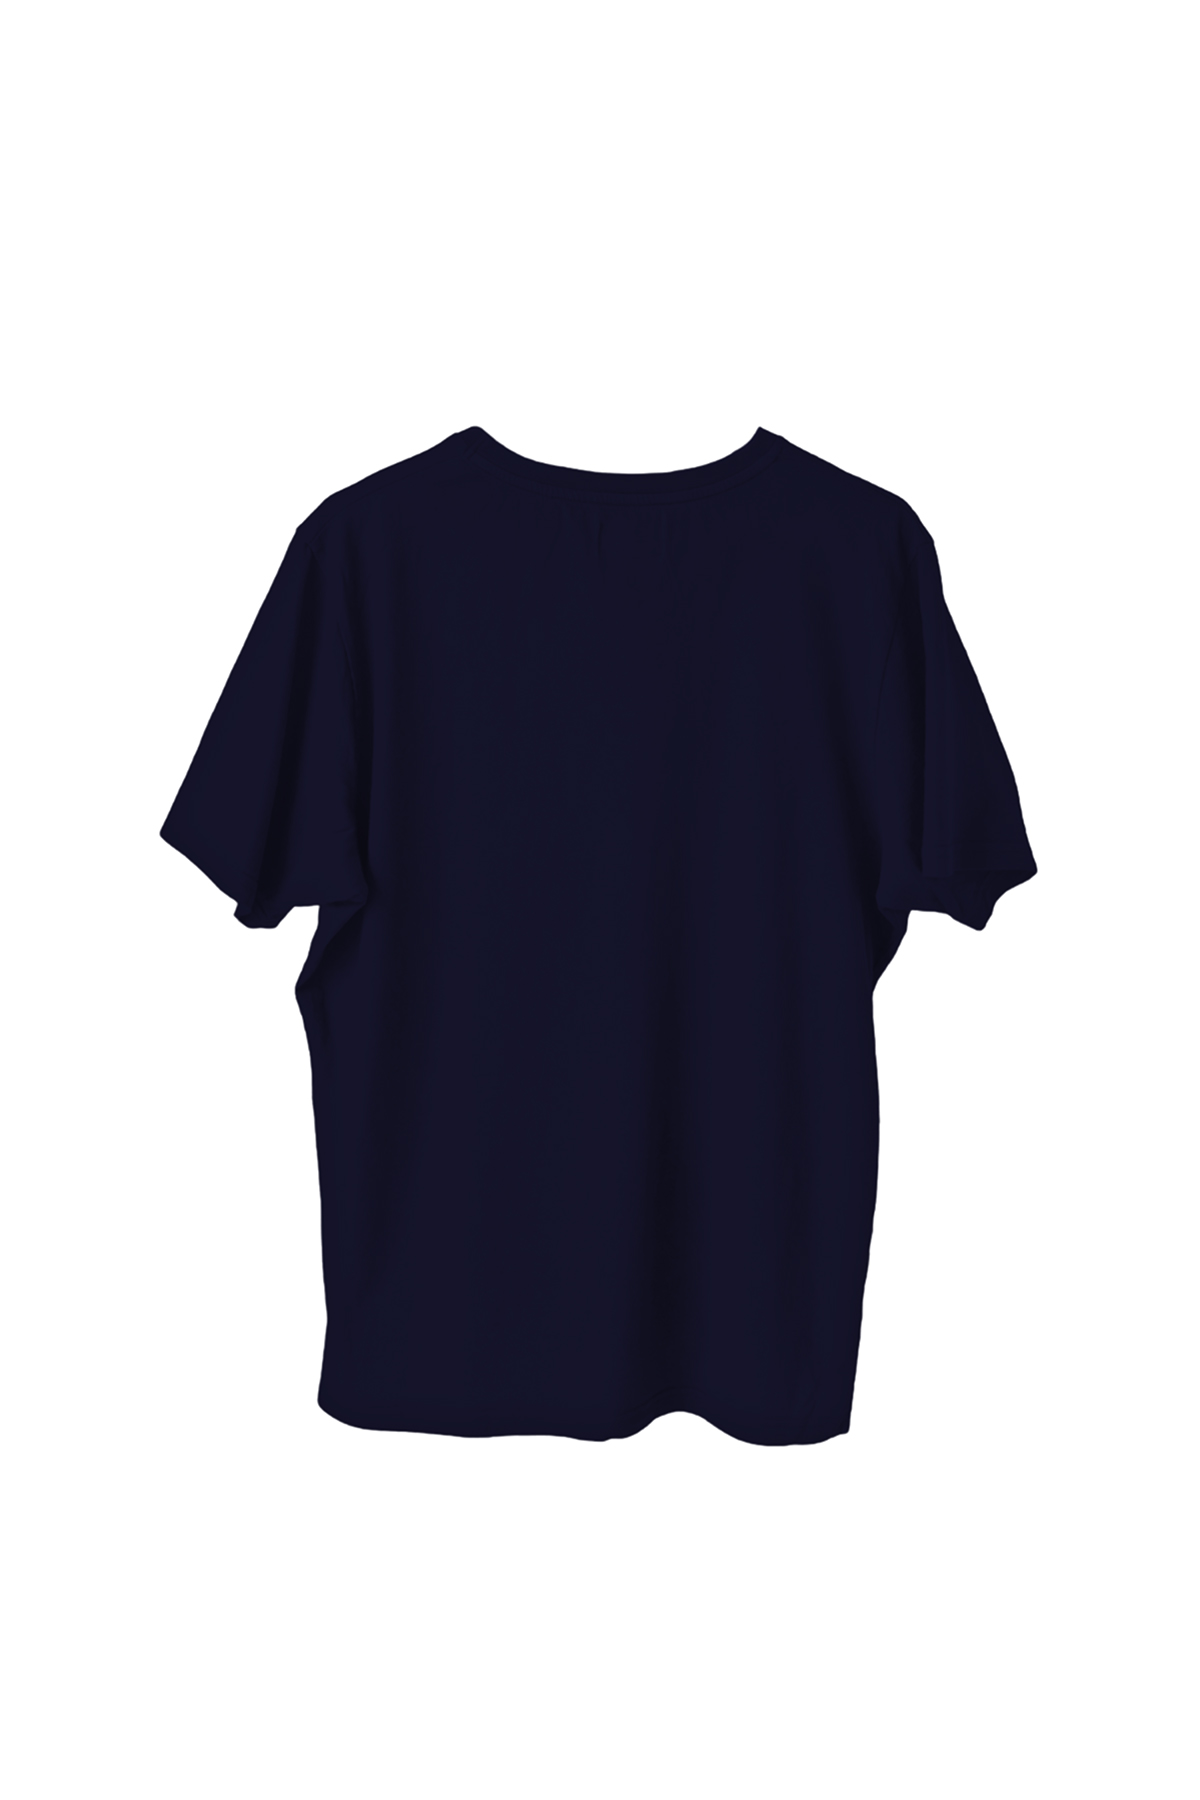 Time-Out-X-Signature-Short-Sleeve-Classic-Training-T-Shirt—Navy-Blue—Back